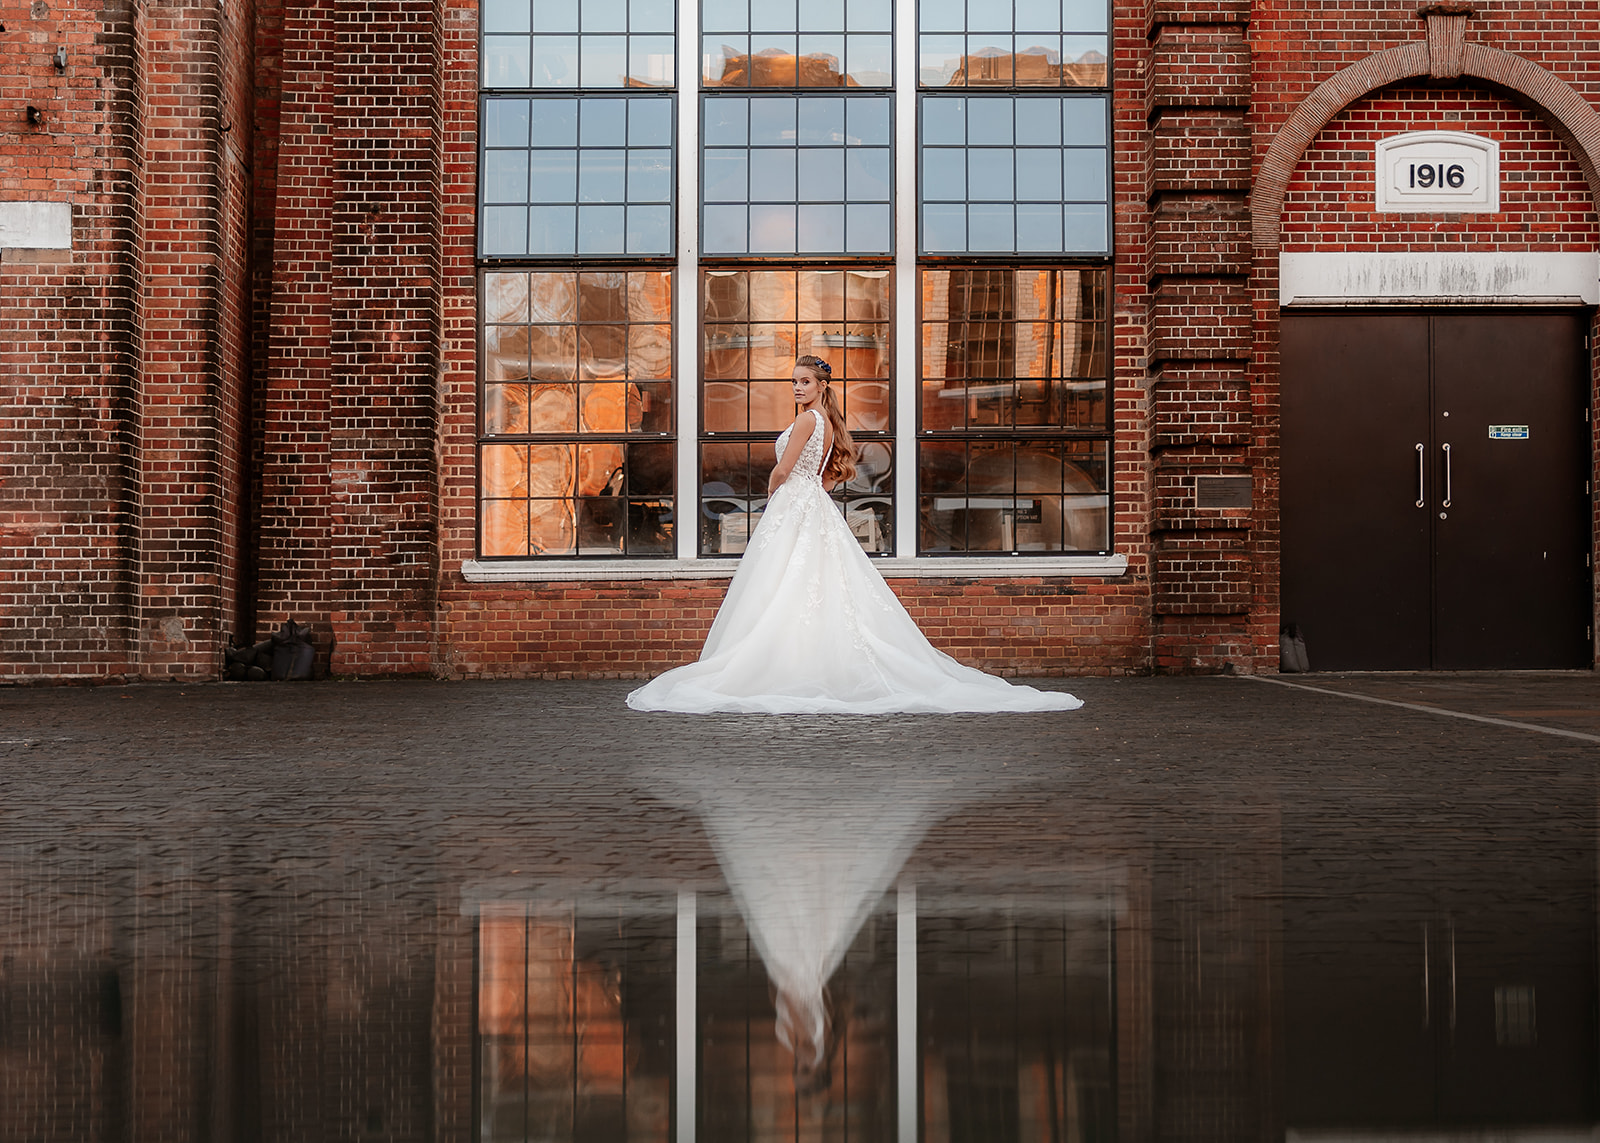 Bridal model in a white wedding dress stands in front of tall industrial windows at the Bombay Sapphire Distillery. 